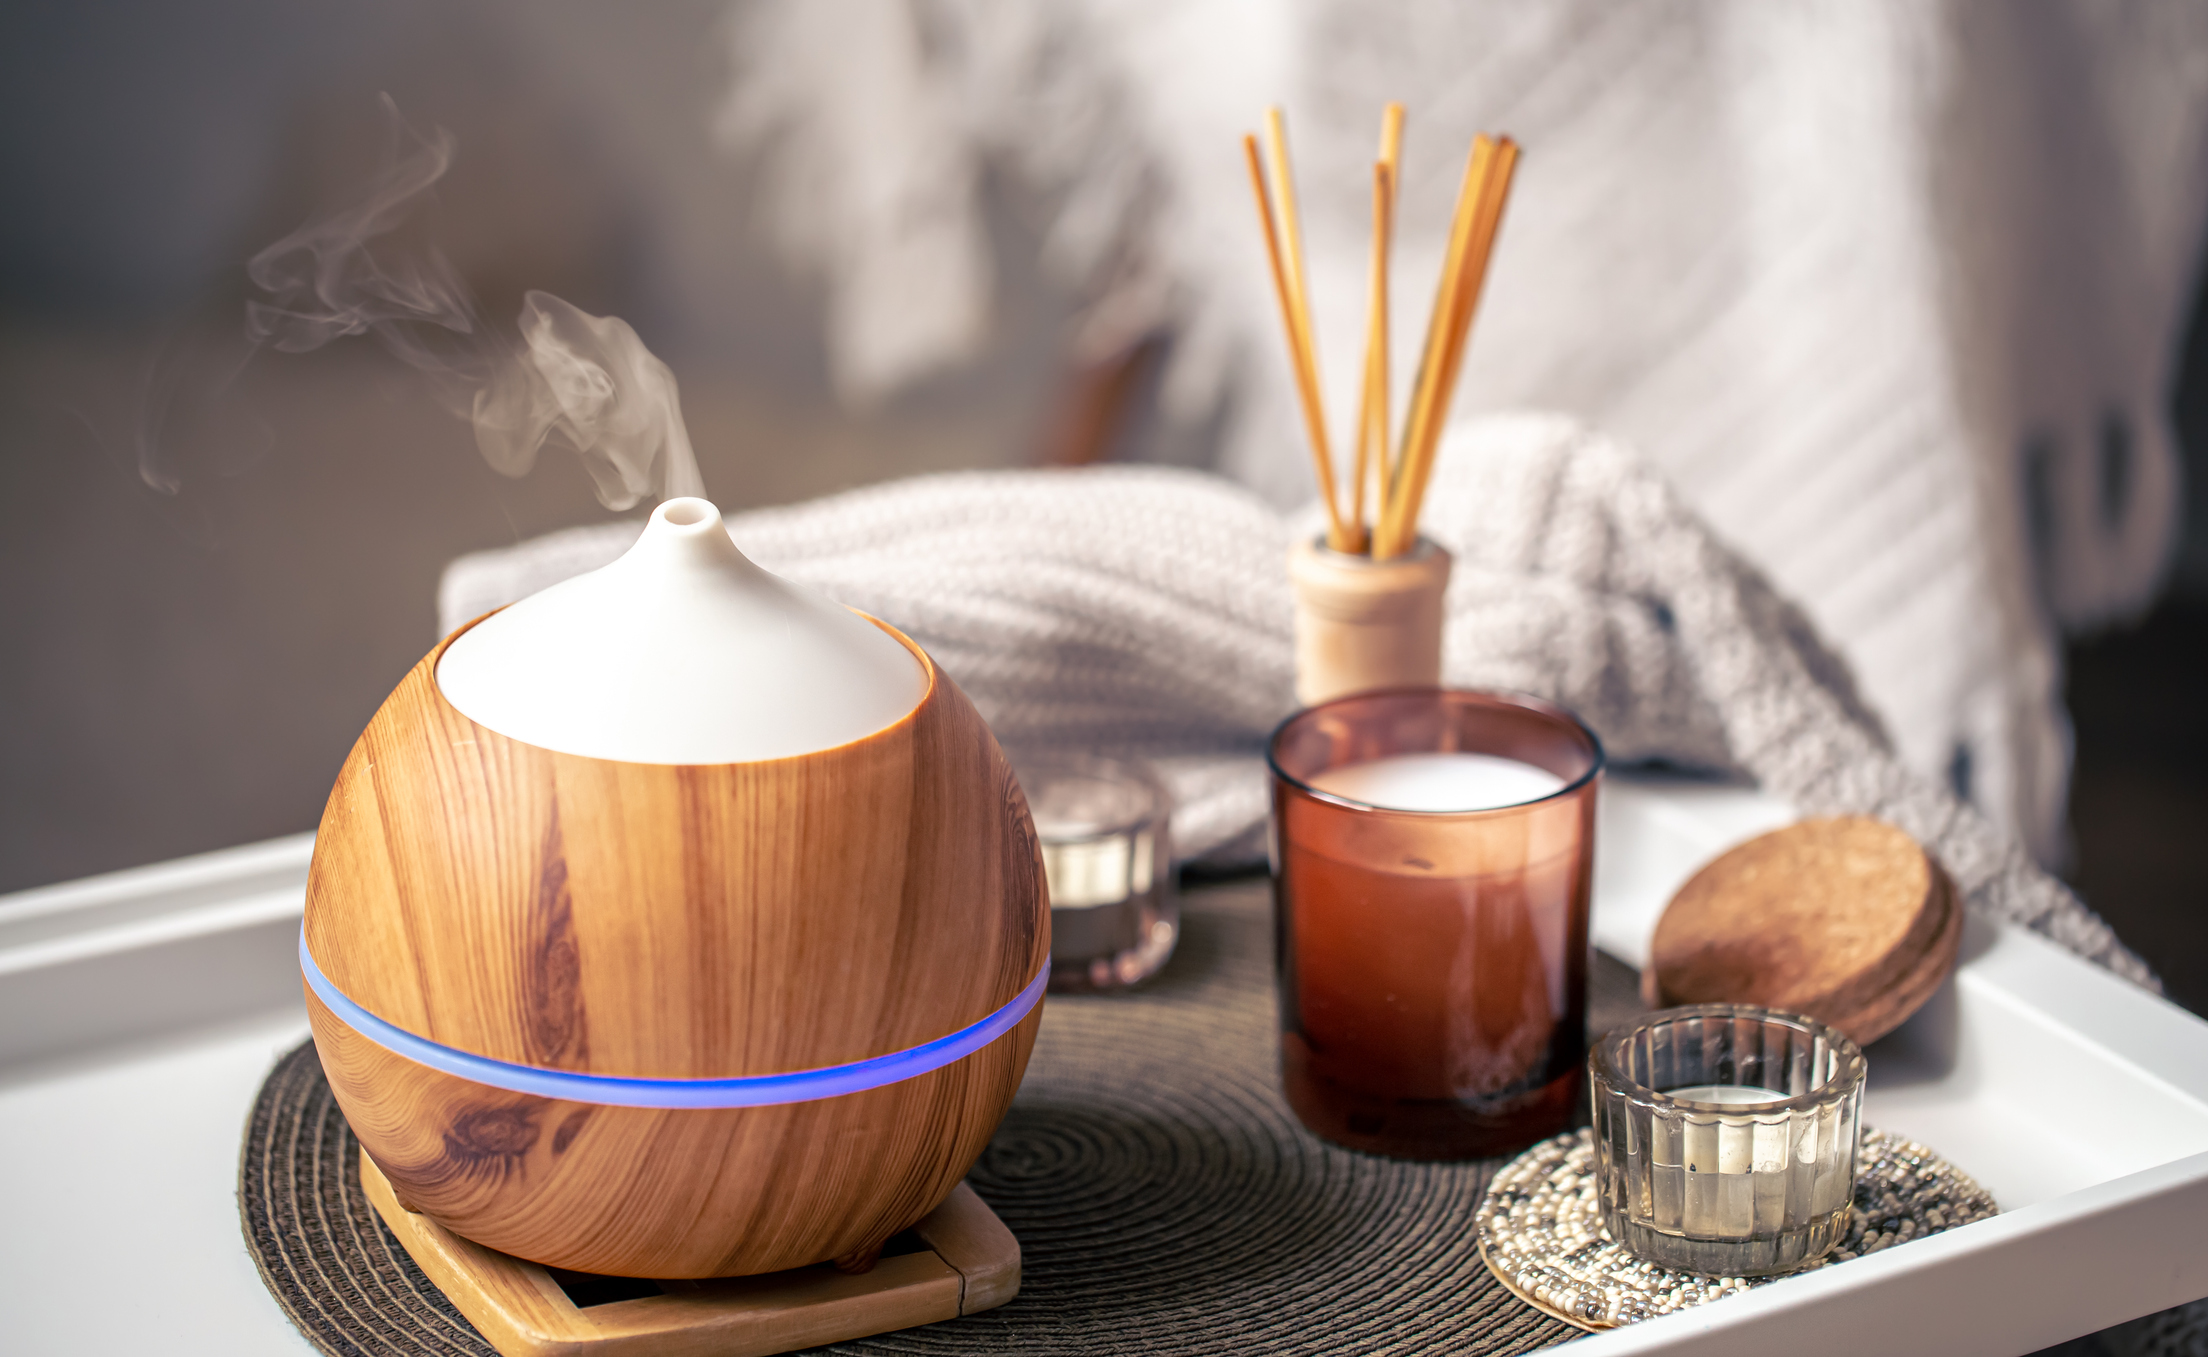 Lifestyle image of an electric oil diffuser on a tray next to various scented candles